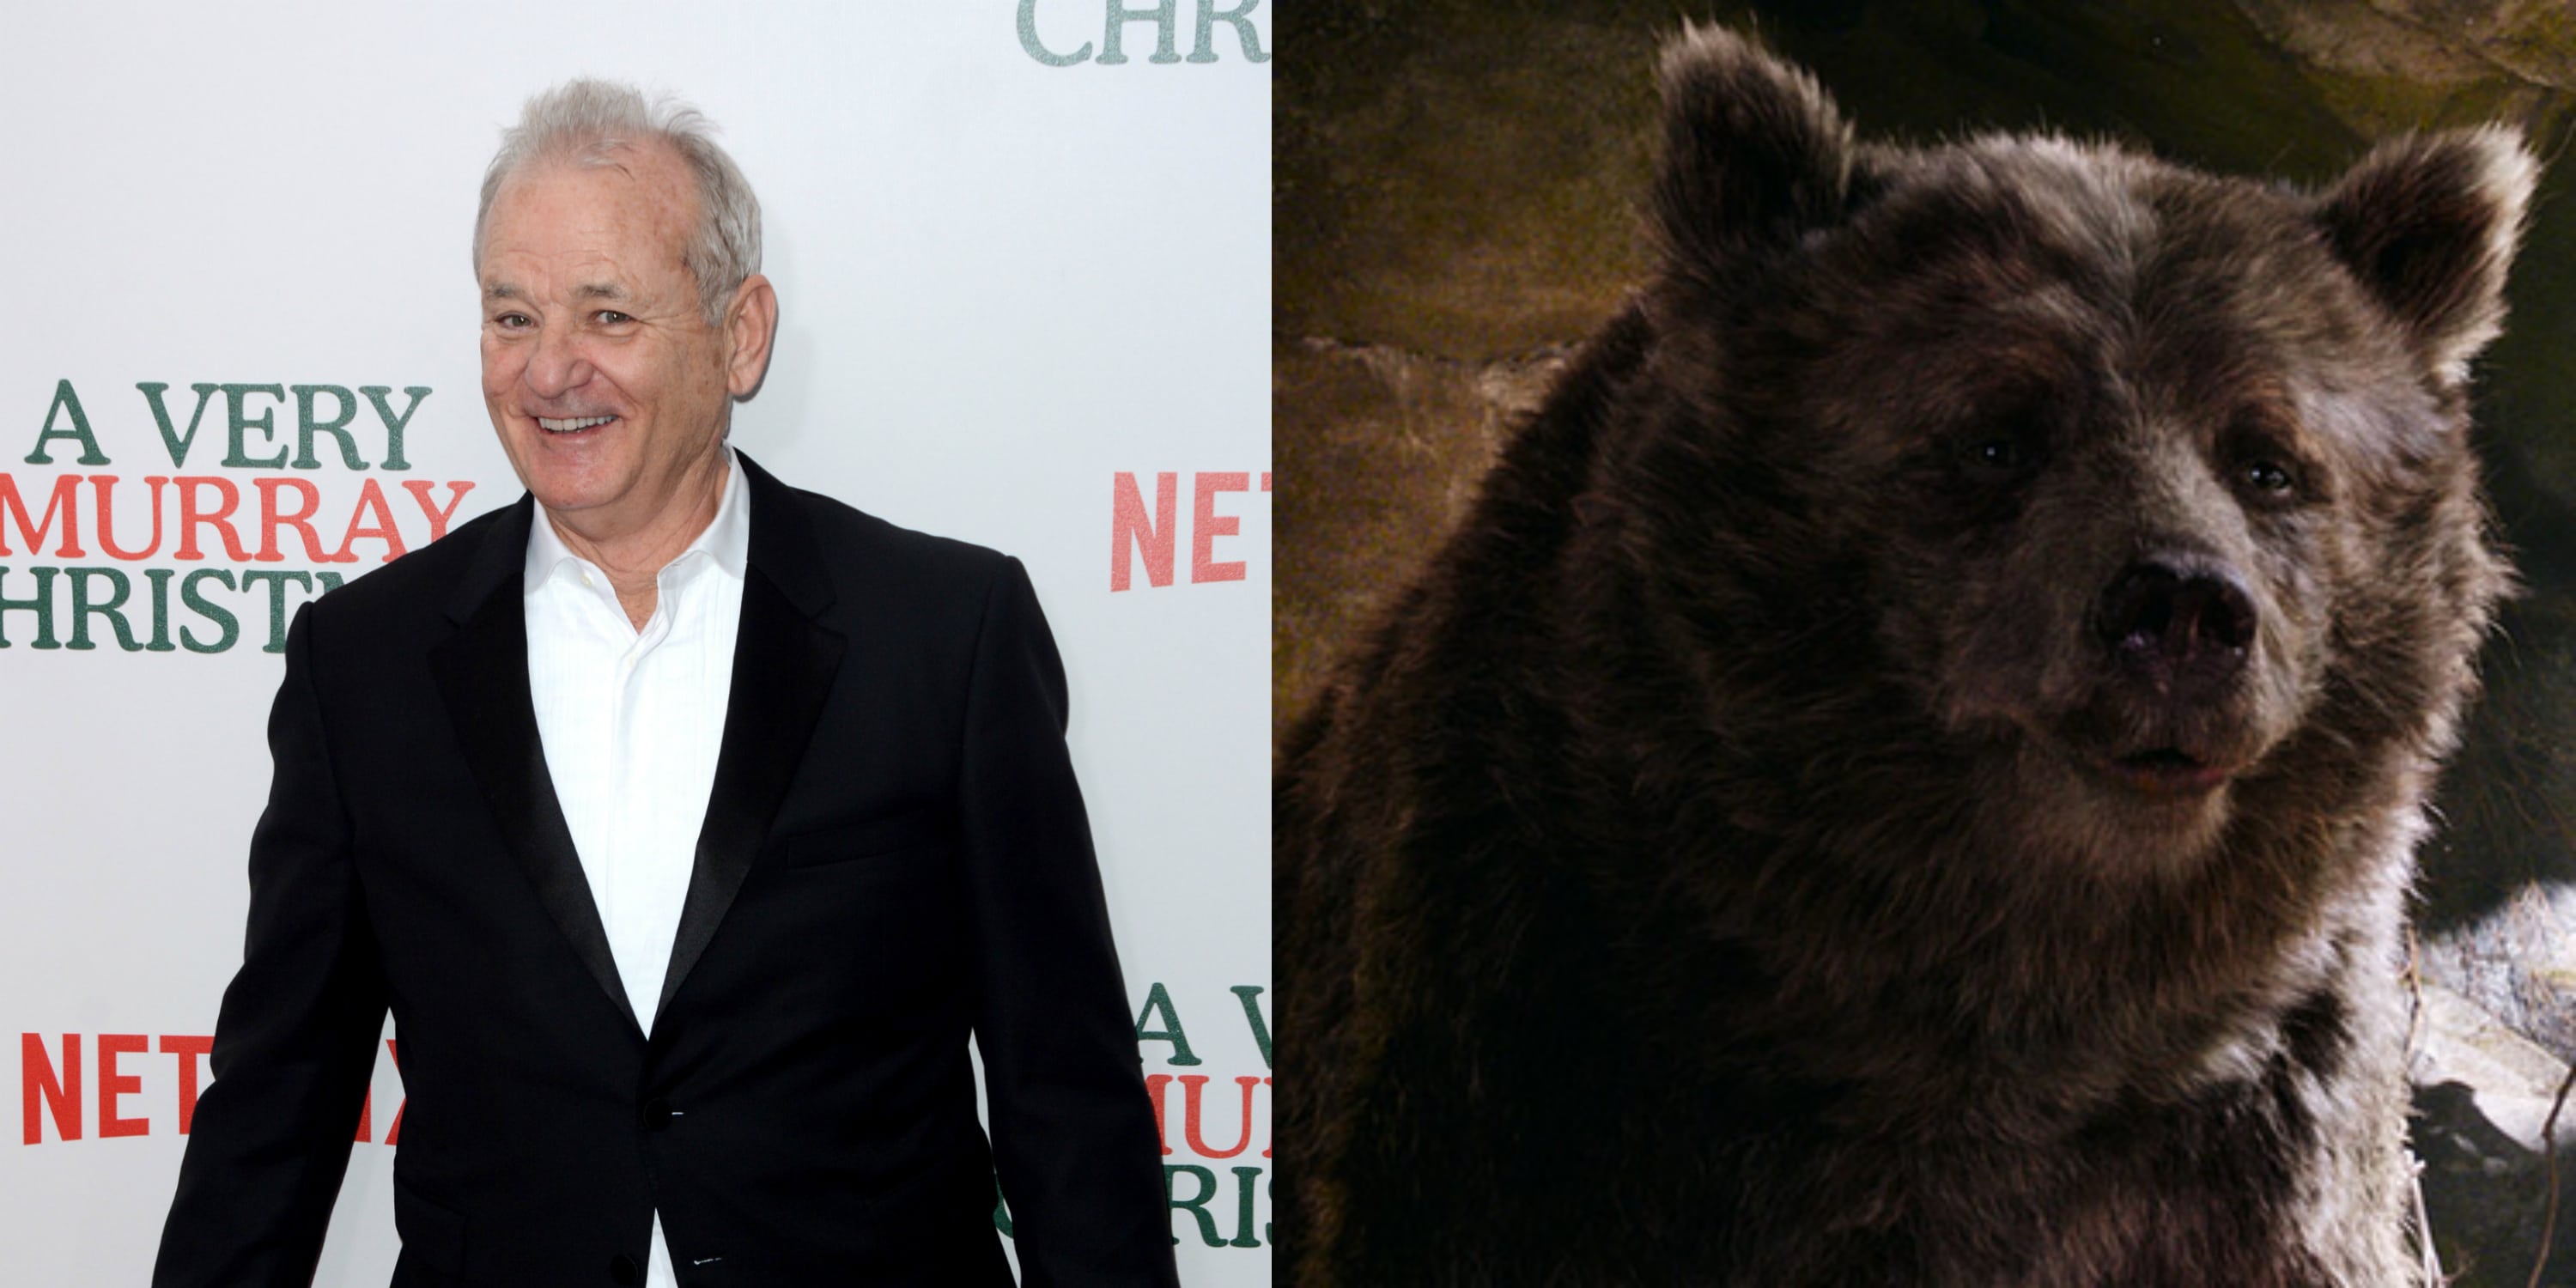 the-jungle-book-actors-youll-see-and-hear-in-the-film-bill-murray-as-baloo